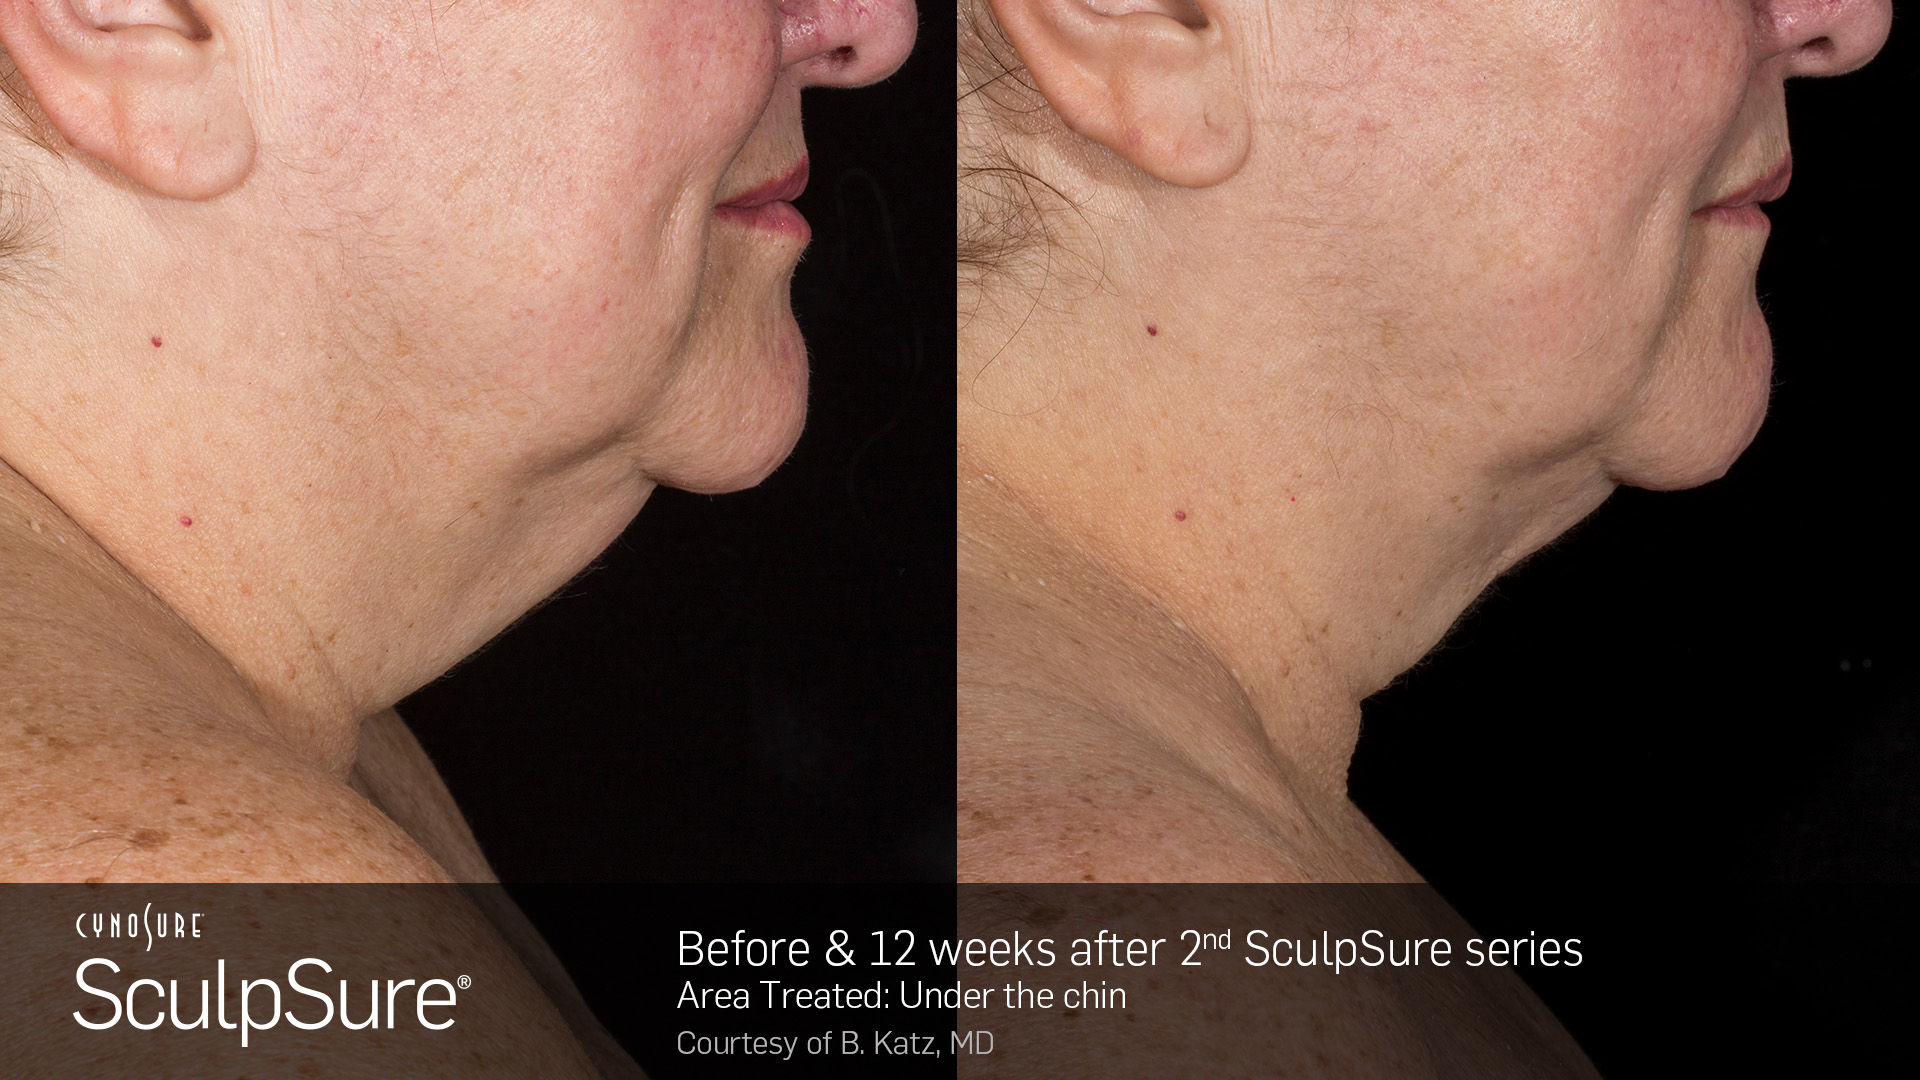 Before and after Sculpsure 2